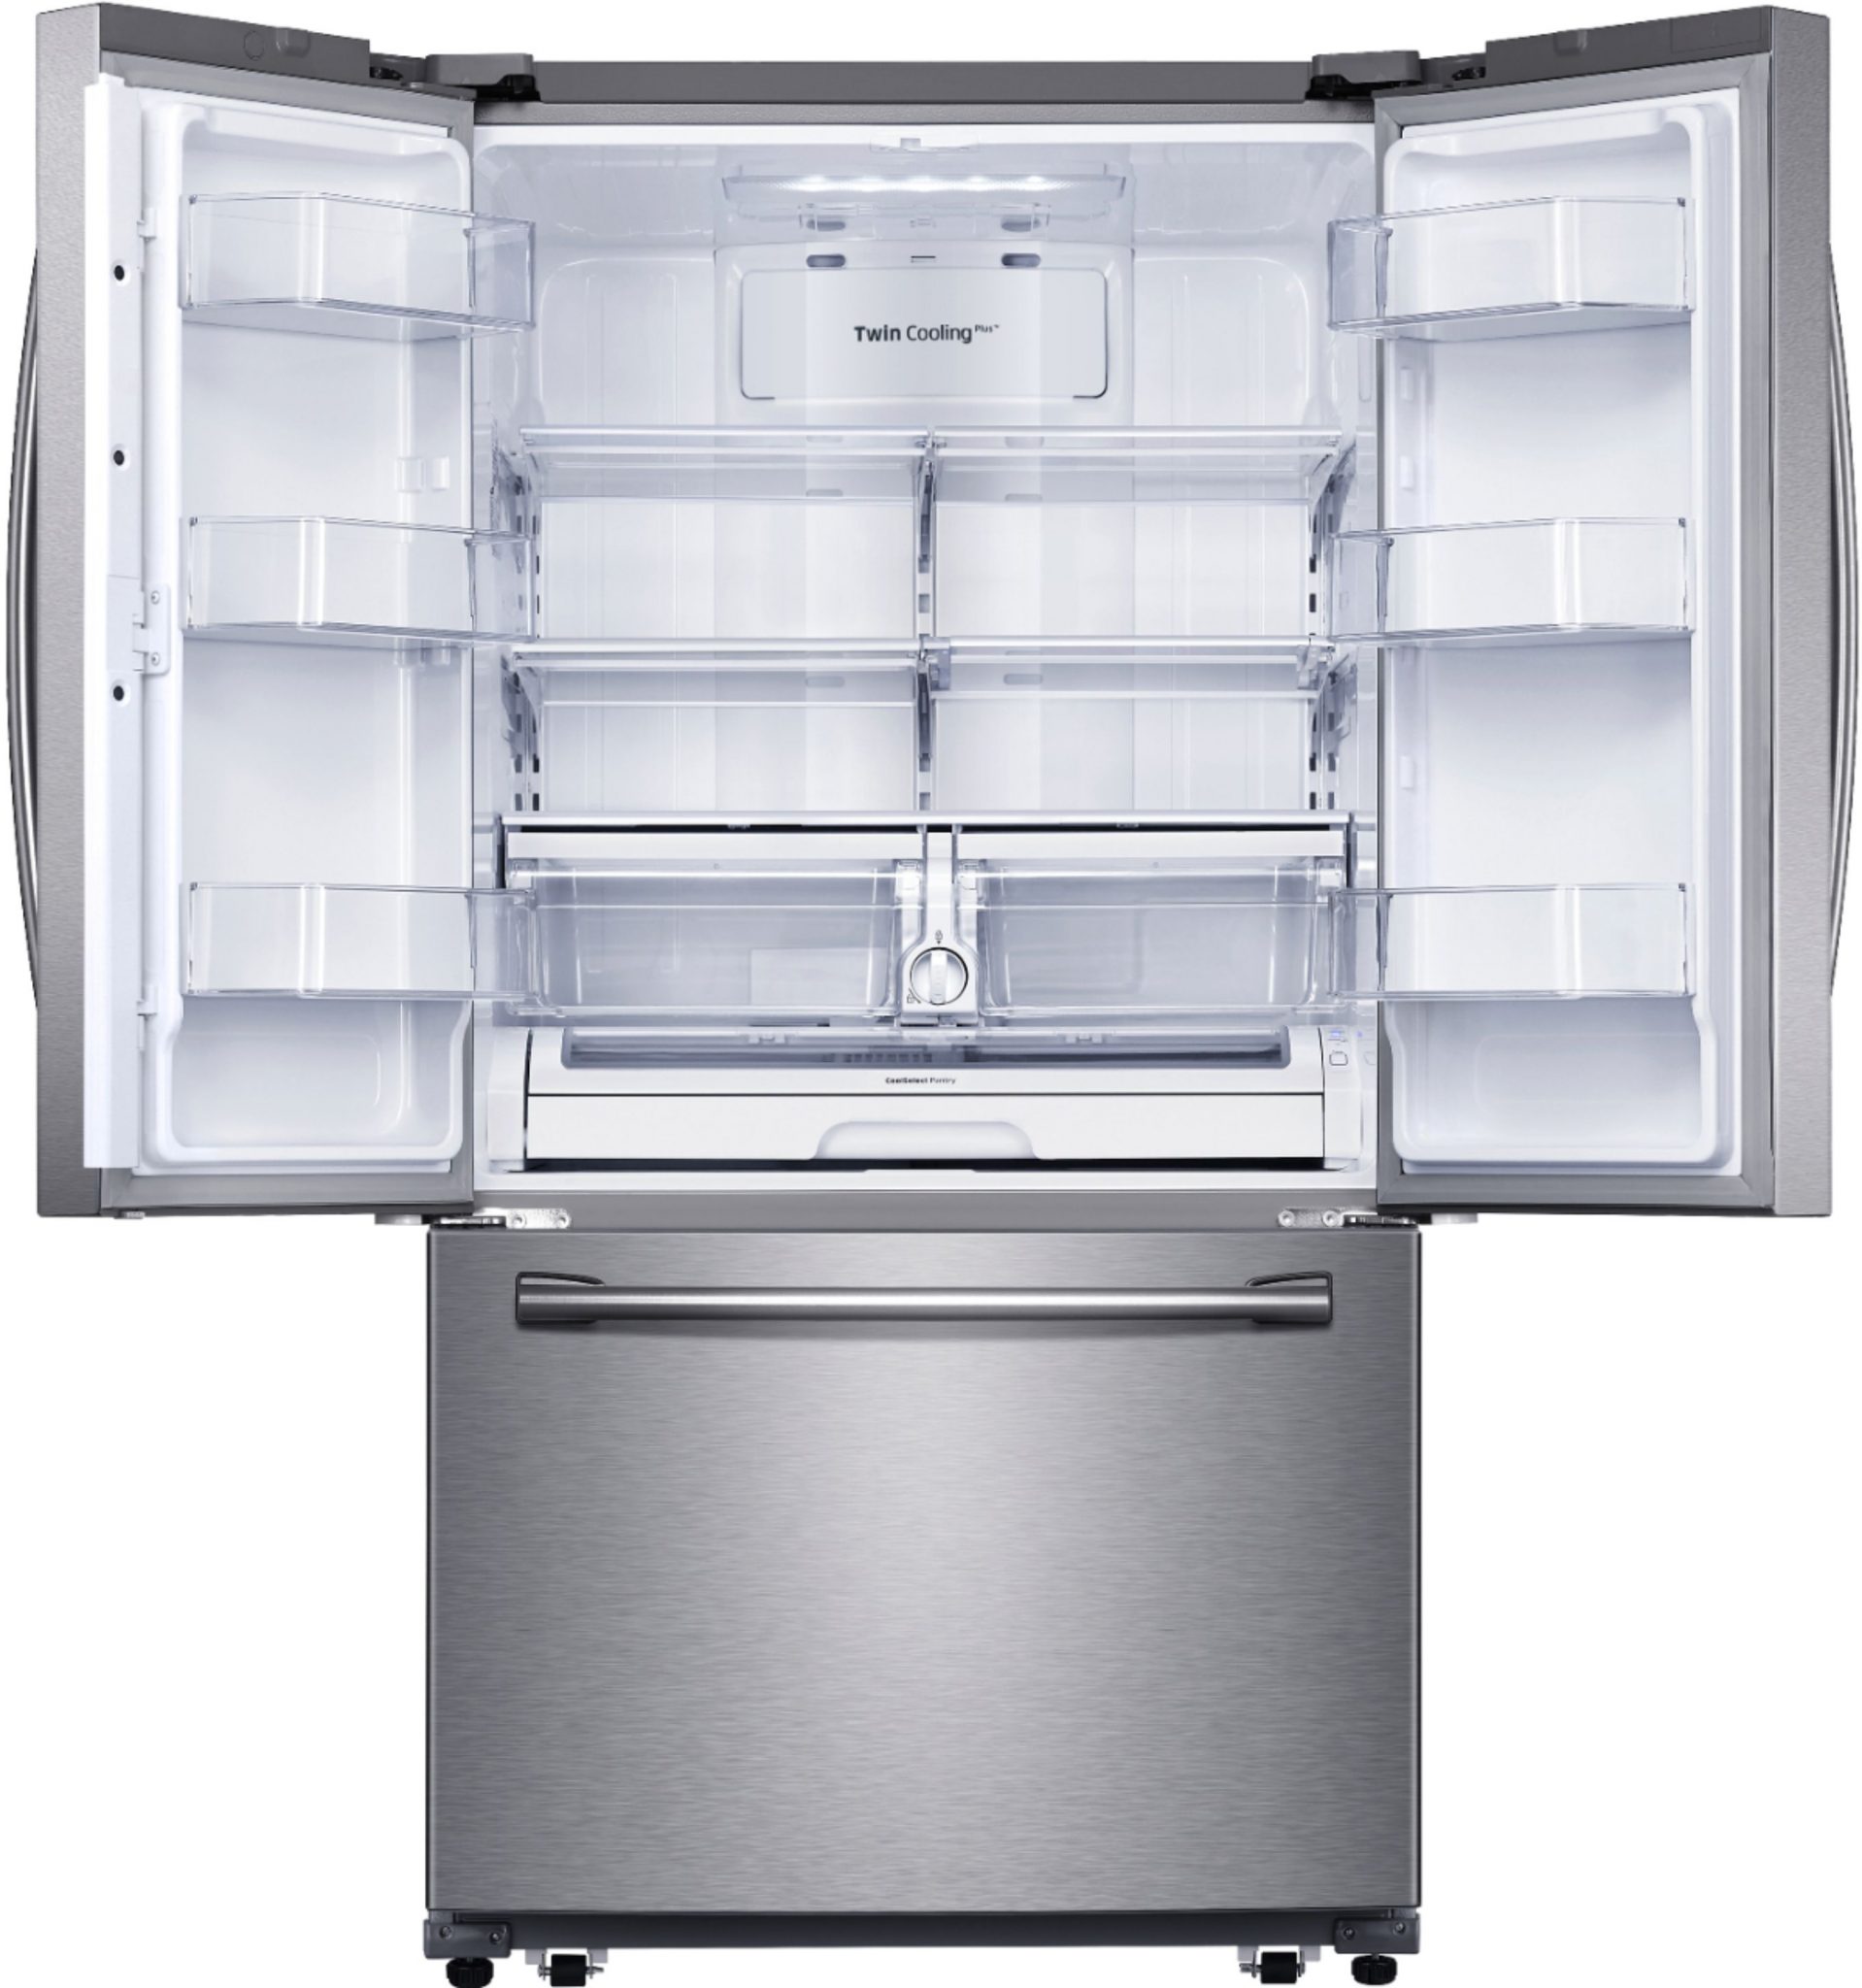 Samsung – 25.1 Cu. Ft. French Door Refrigerator with Family Hub